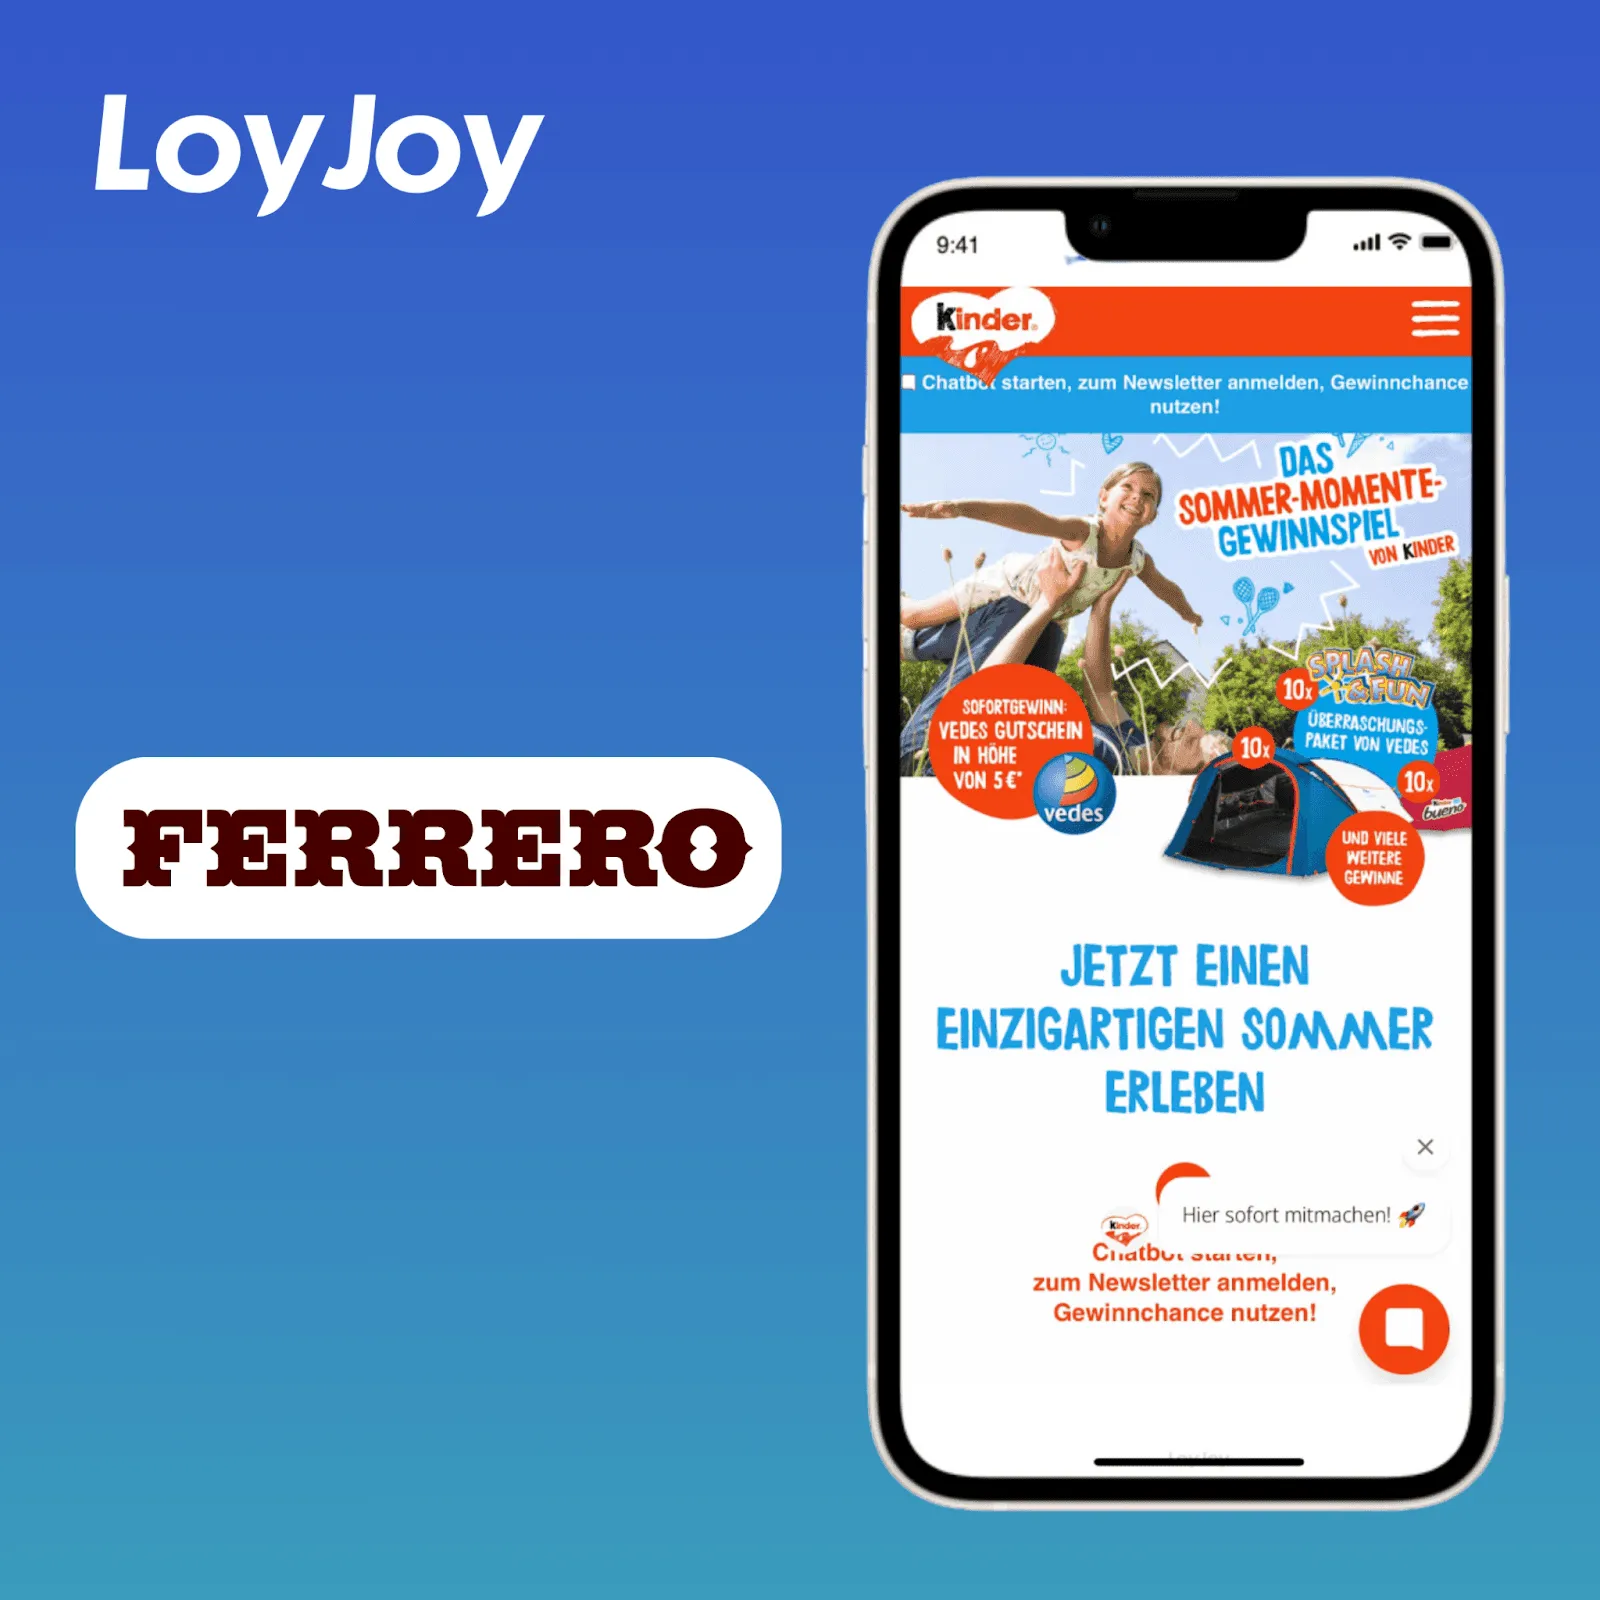 The Ferrero summer quiz is displayed on a smartphone.